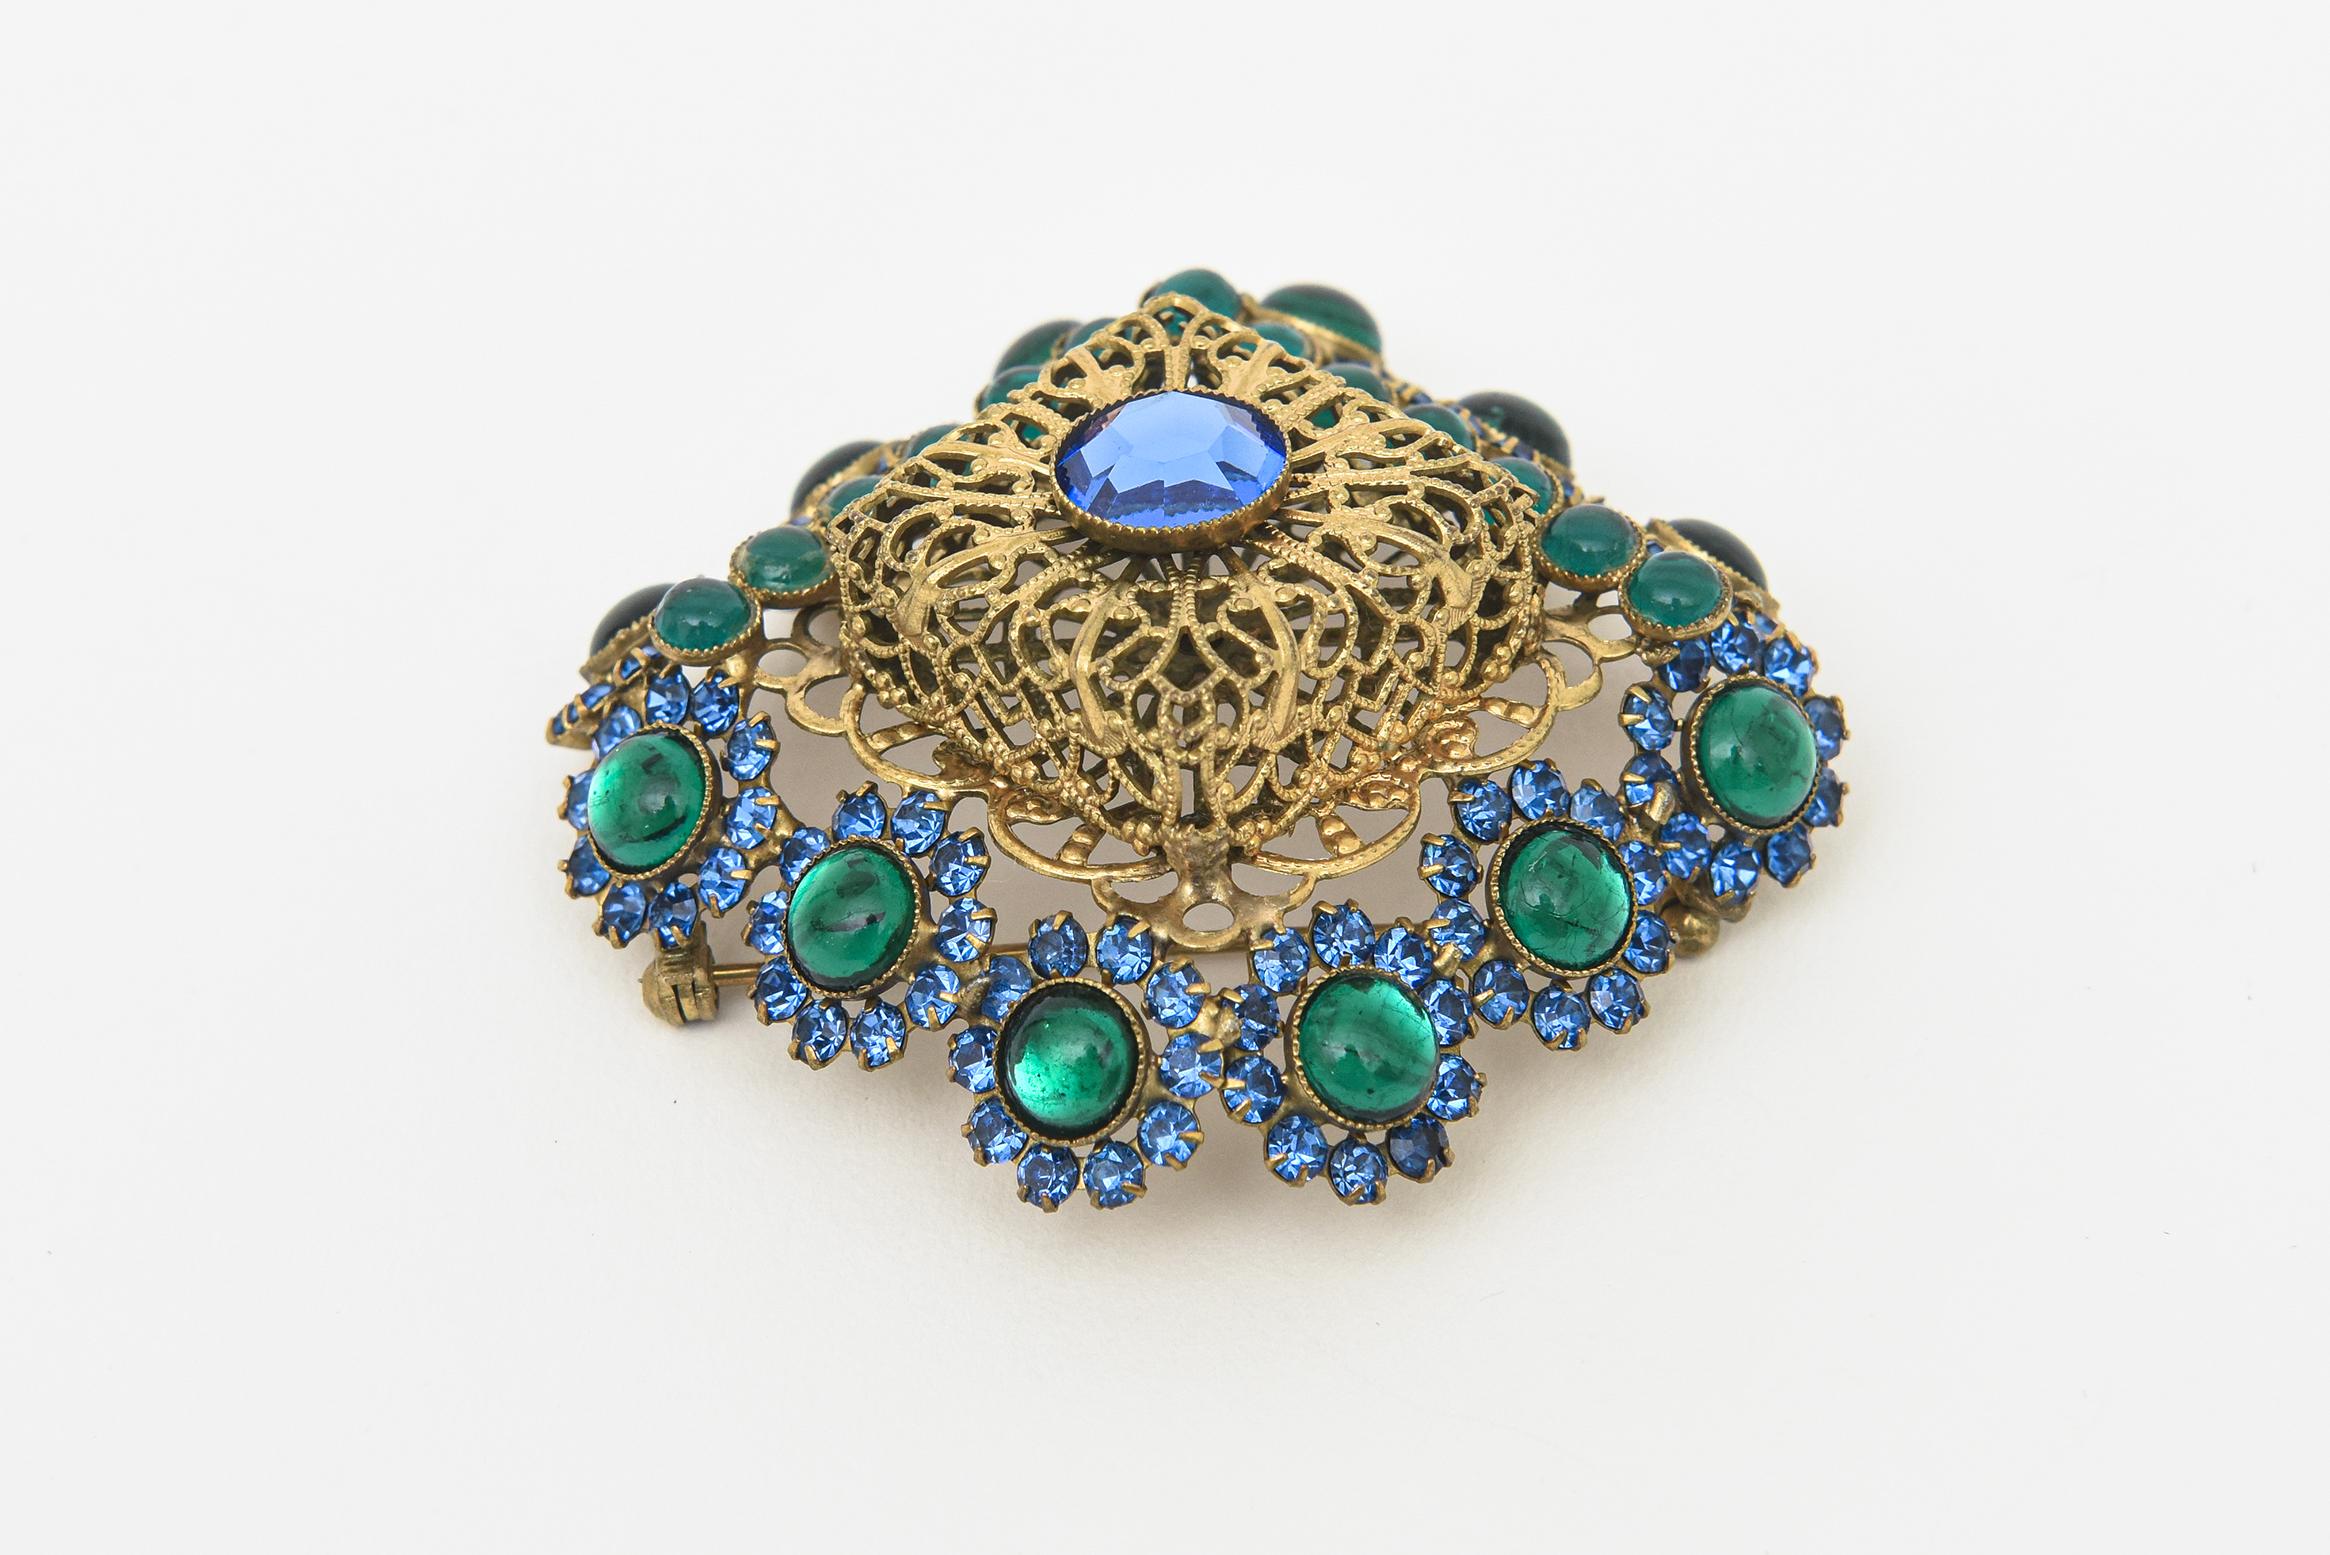 This stunning vintage hallmarked Hattie Carnegie pin/ brooch can be angled or placed straight on. The gilt metal filigree work is surrounded by blue and green glass stones. Signed Hattie Carnegie on the back. This is a rare brooch and we have the